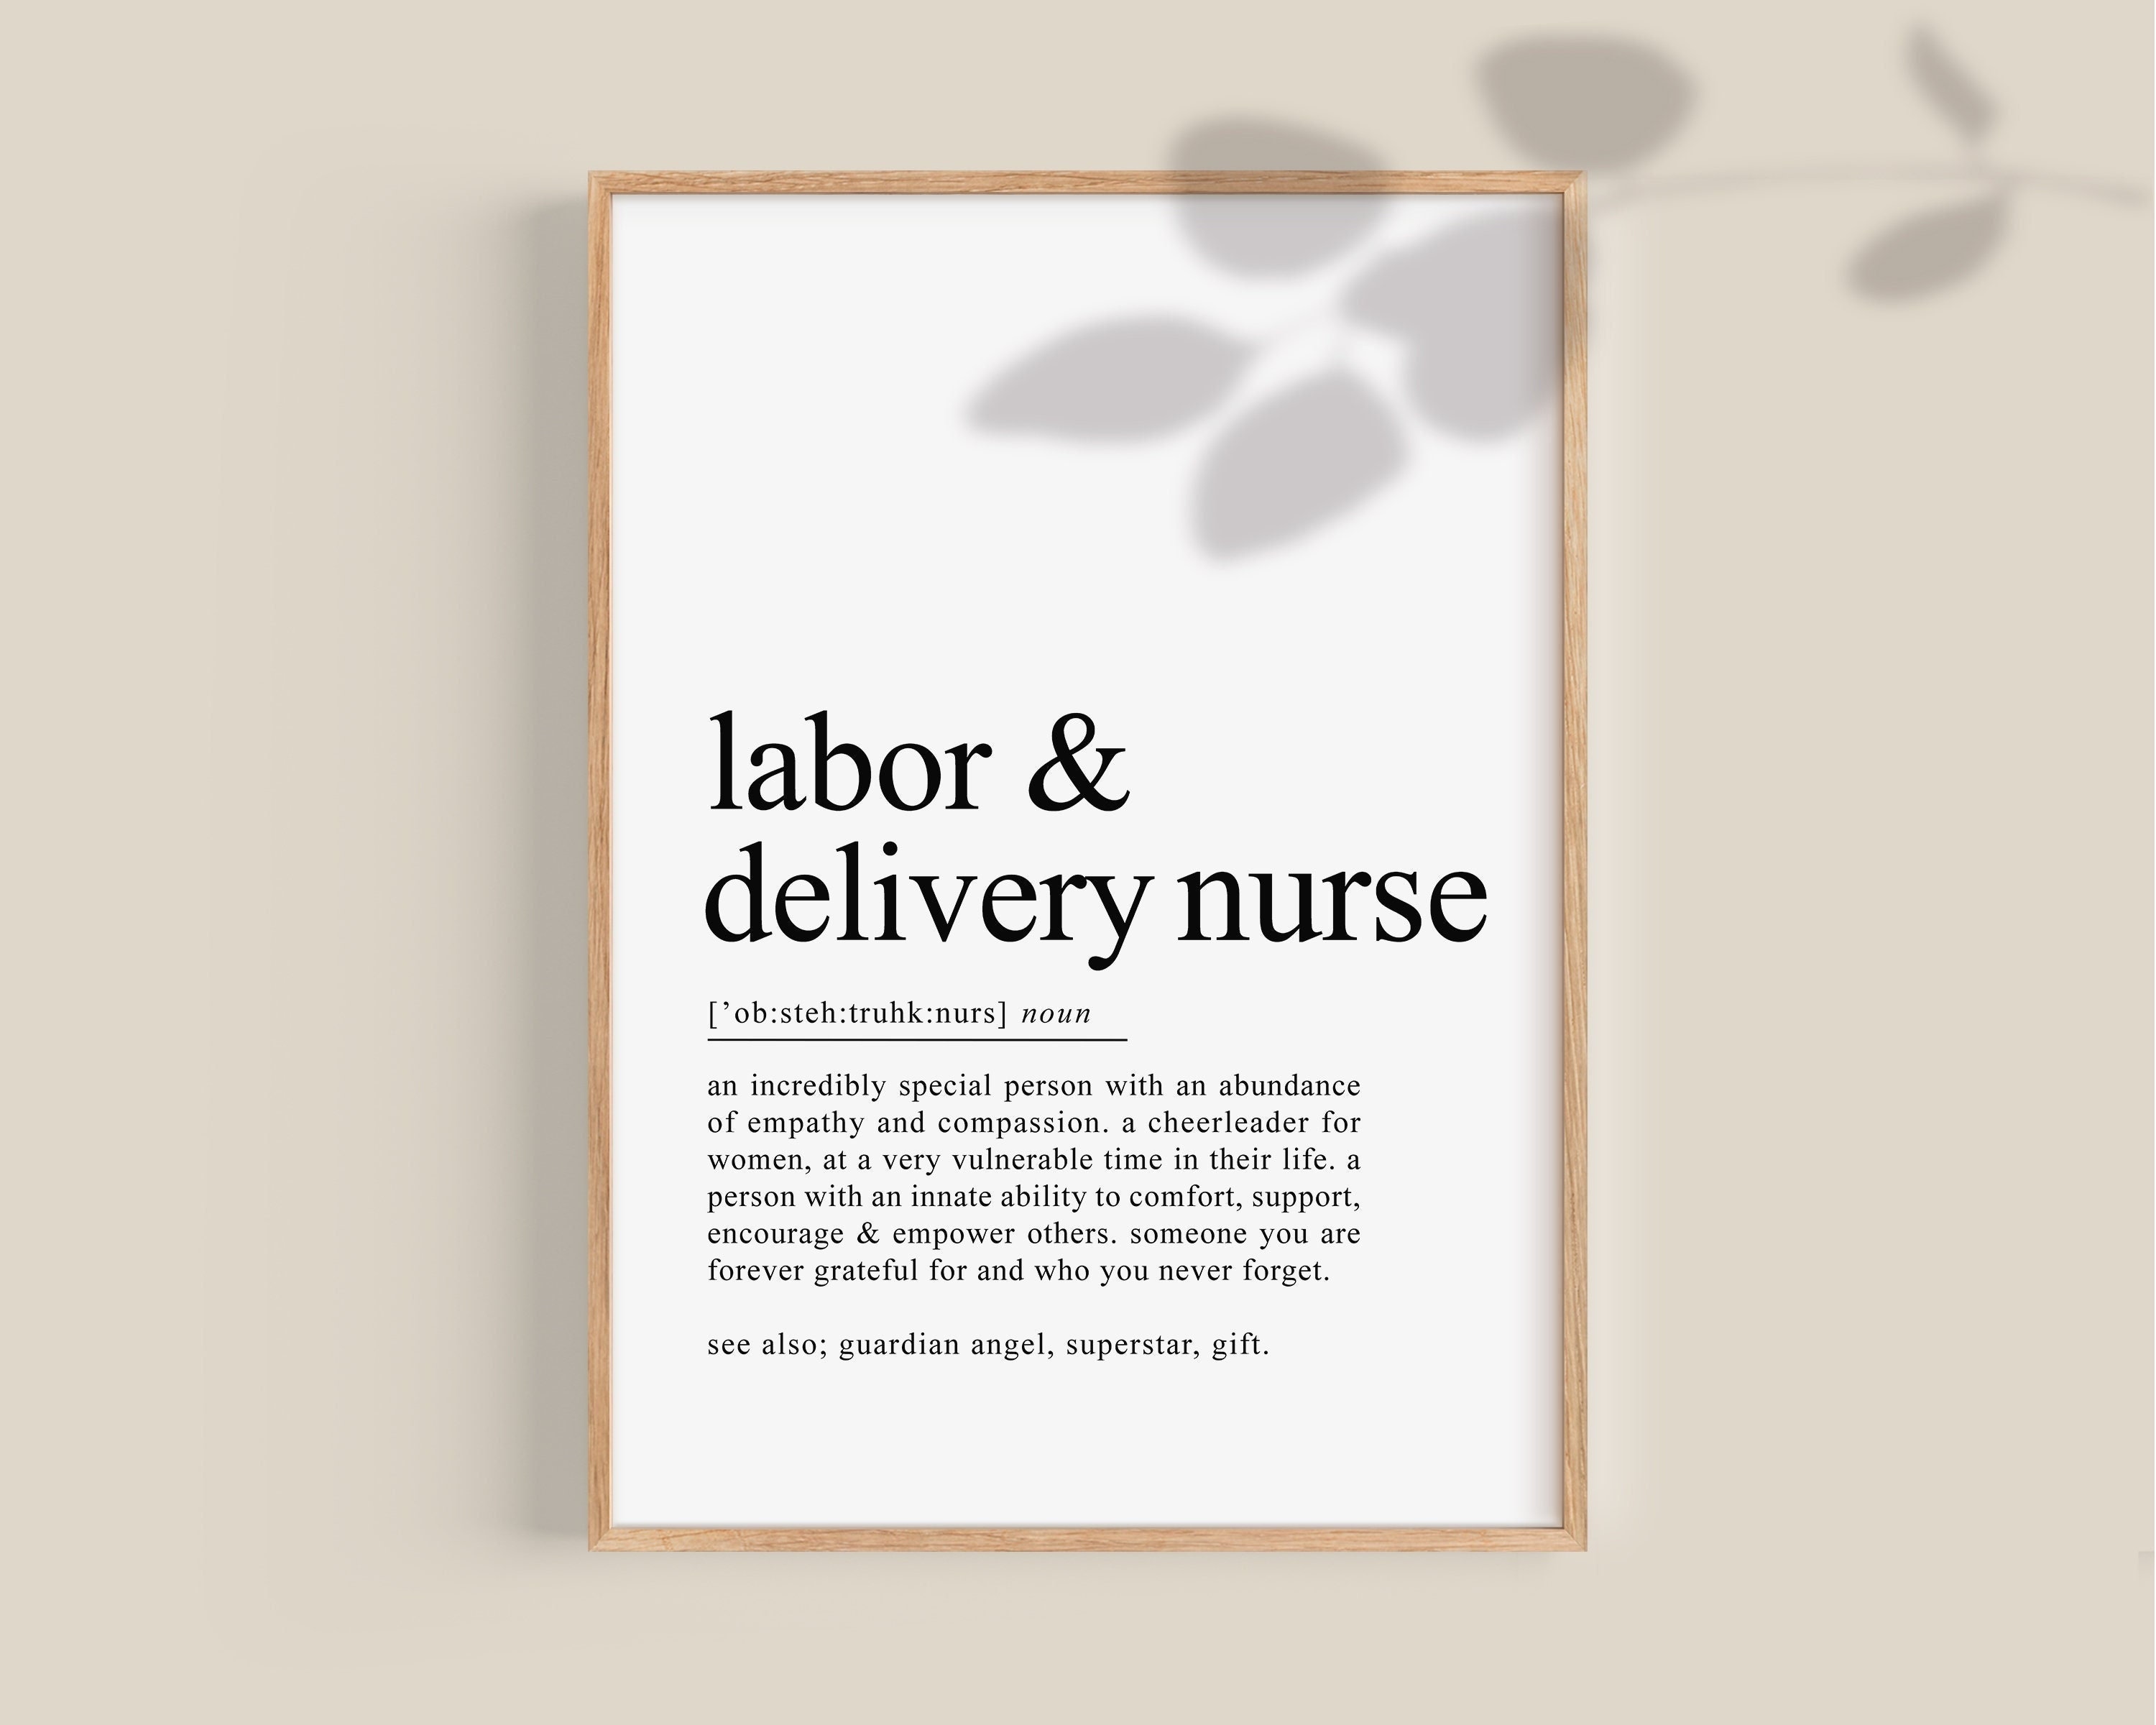 How much do Labor and Delivery Nurses (L&D Nurses) make?